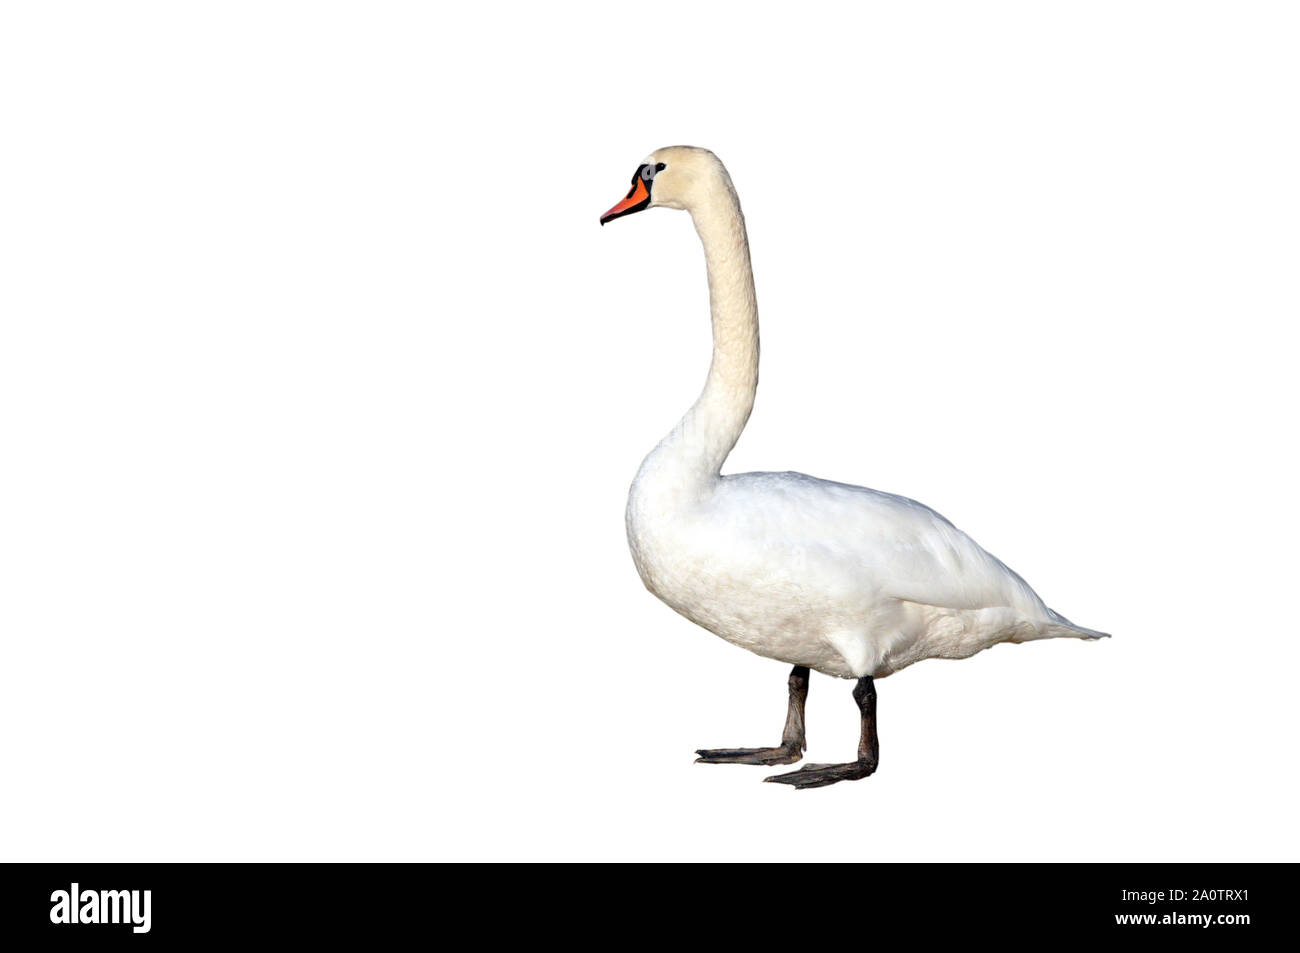 Mute Swan standing. Isolated on white background. Stock Photo